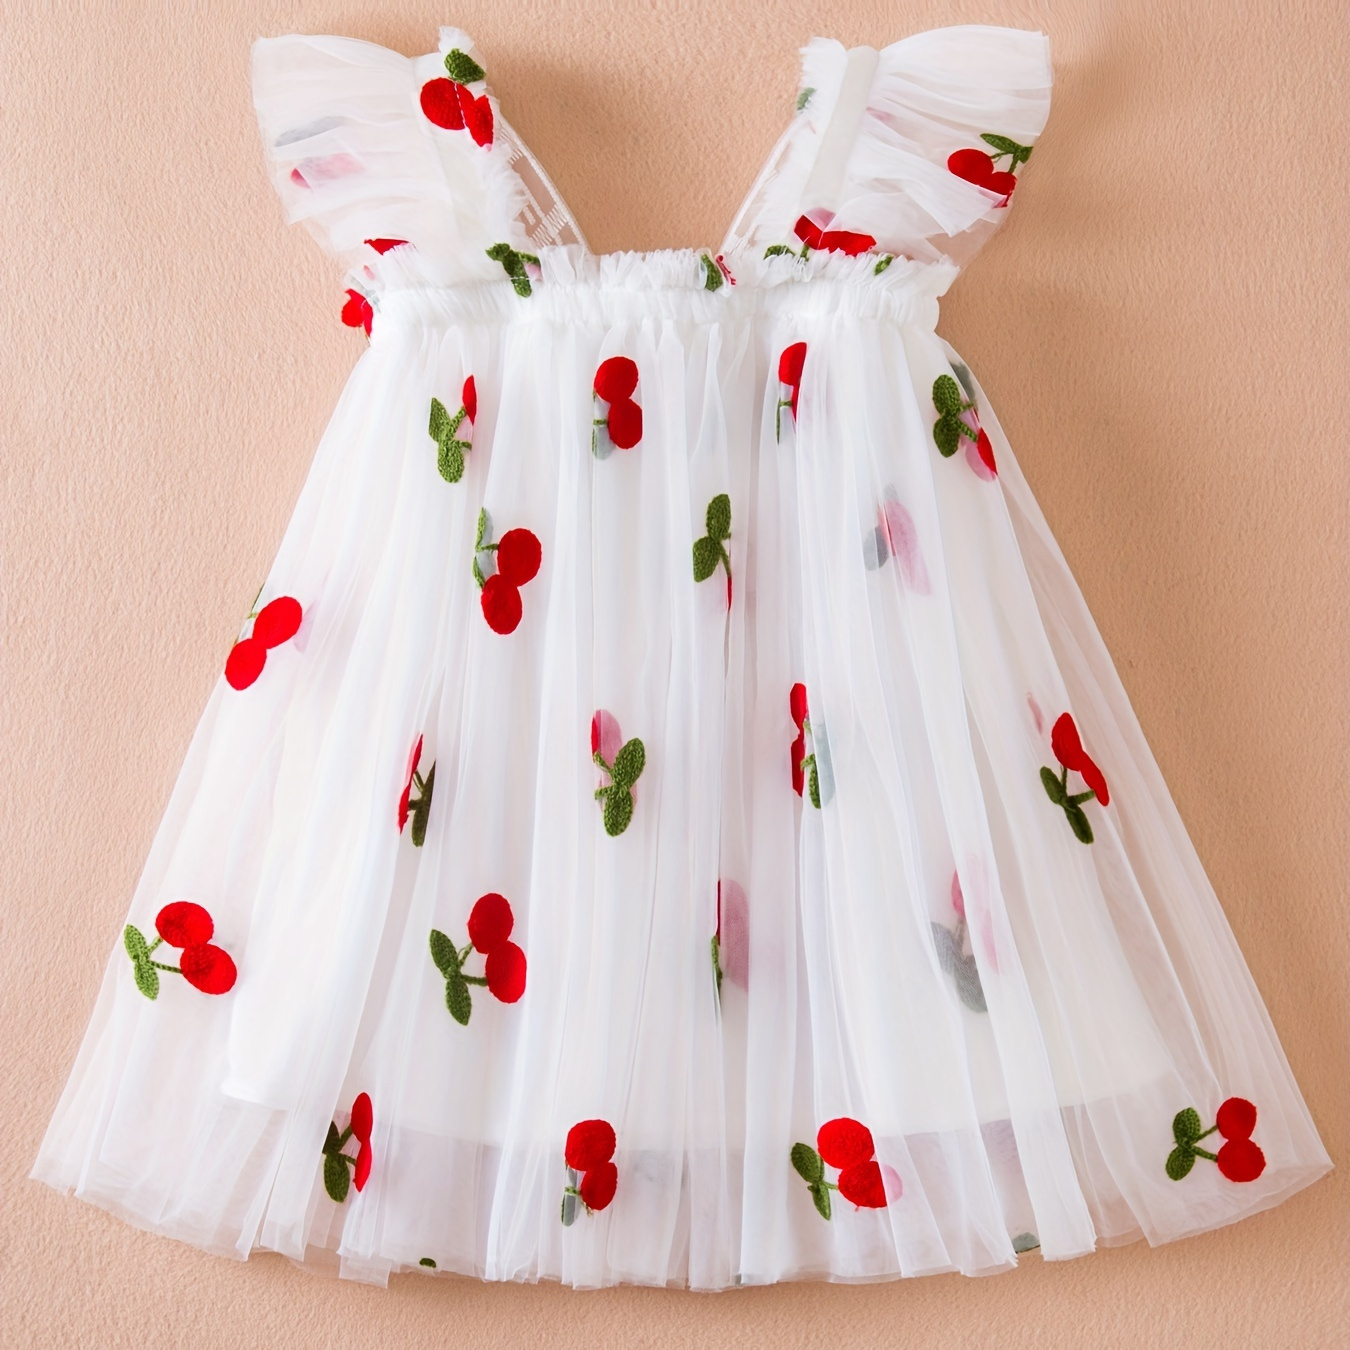 

Toddler Girls Ruffle Trim Cherry Embroidery Frill Trim Back Butterfly Decor Princess Mesh Puffy Dress For Party Beach Vacation Kids Summer Clothes